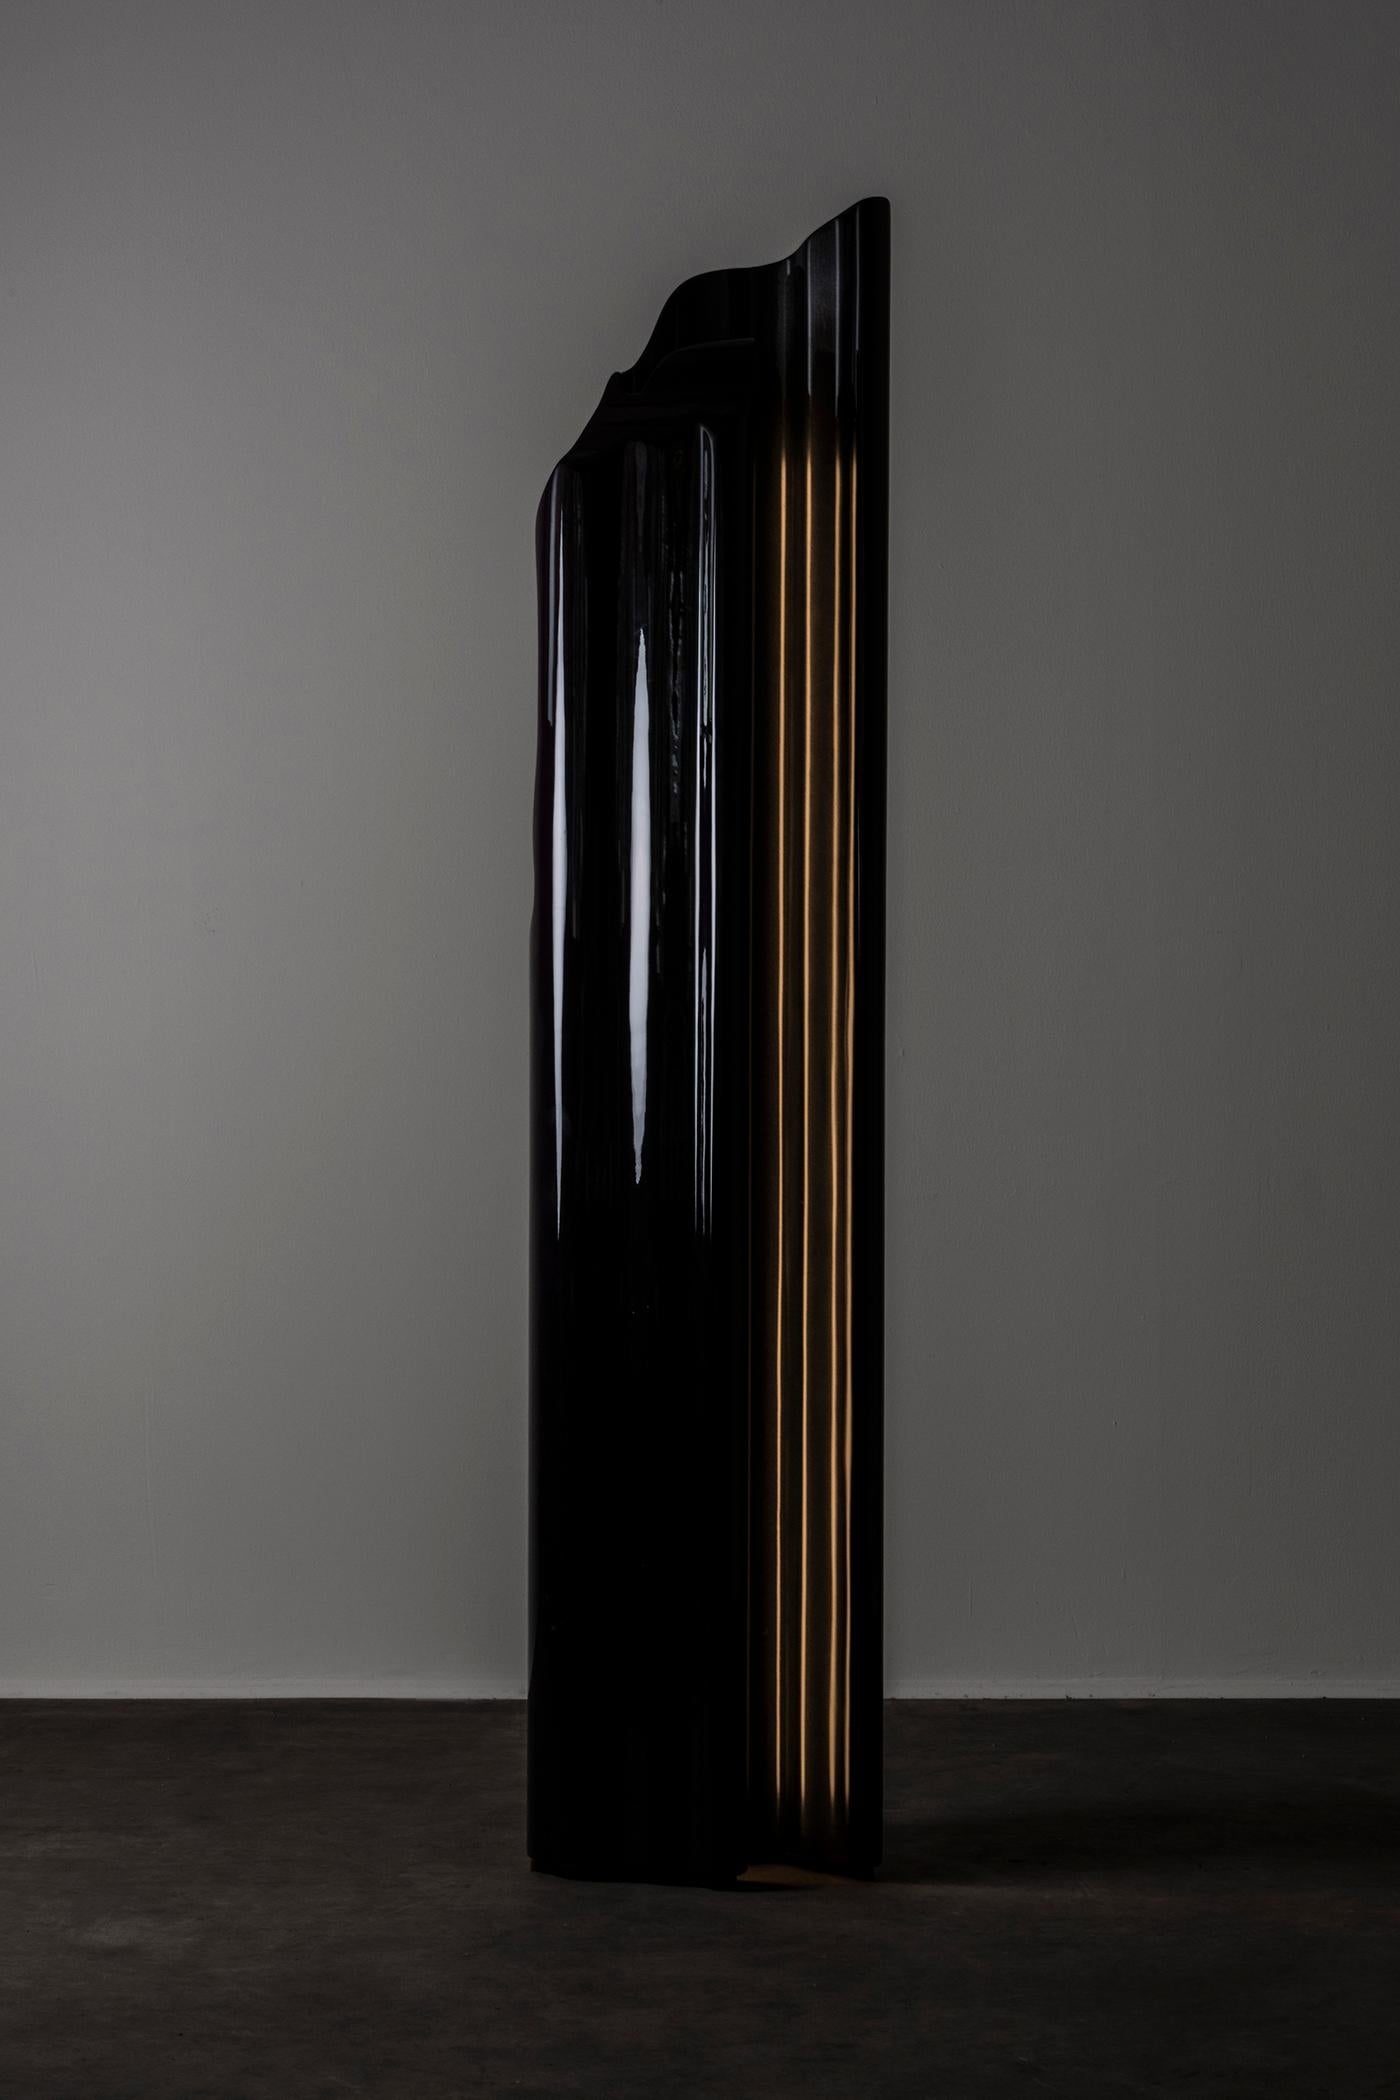 Guise floor lamp by Odd Matter, the Netherlands, 2019. Nilufar edition. Measures: 25 x 33 x H 161 cm, 9.8 x 13 x H 63.3 in. Guise explores the first encounter? Through the potential of spray painting. Surfaces protect what is below and allow us to